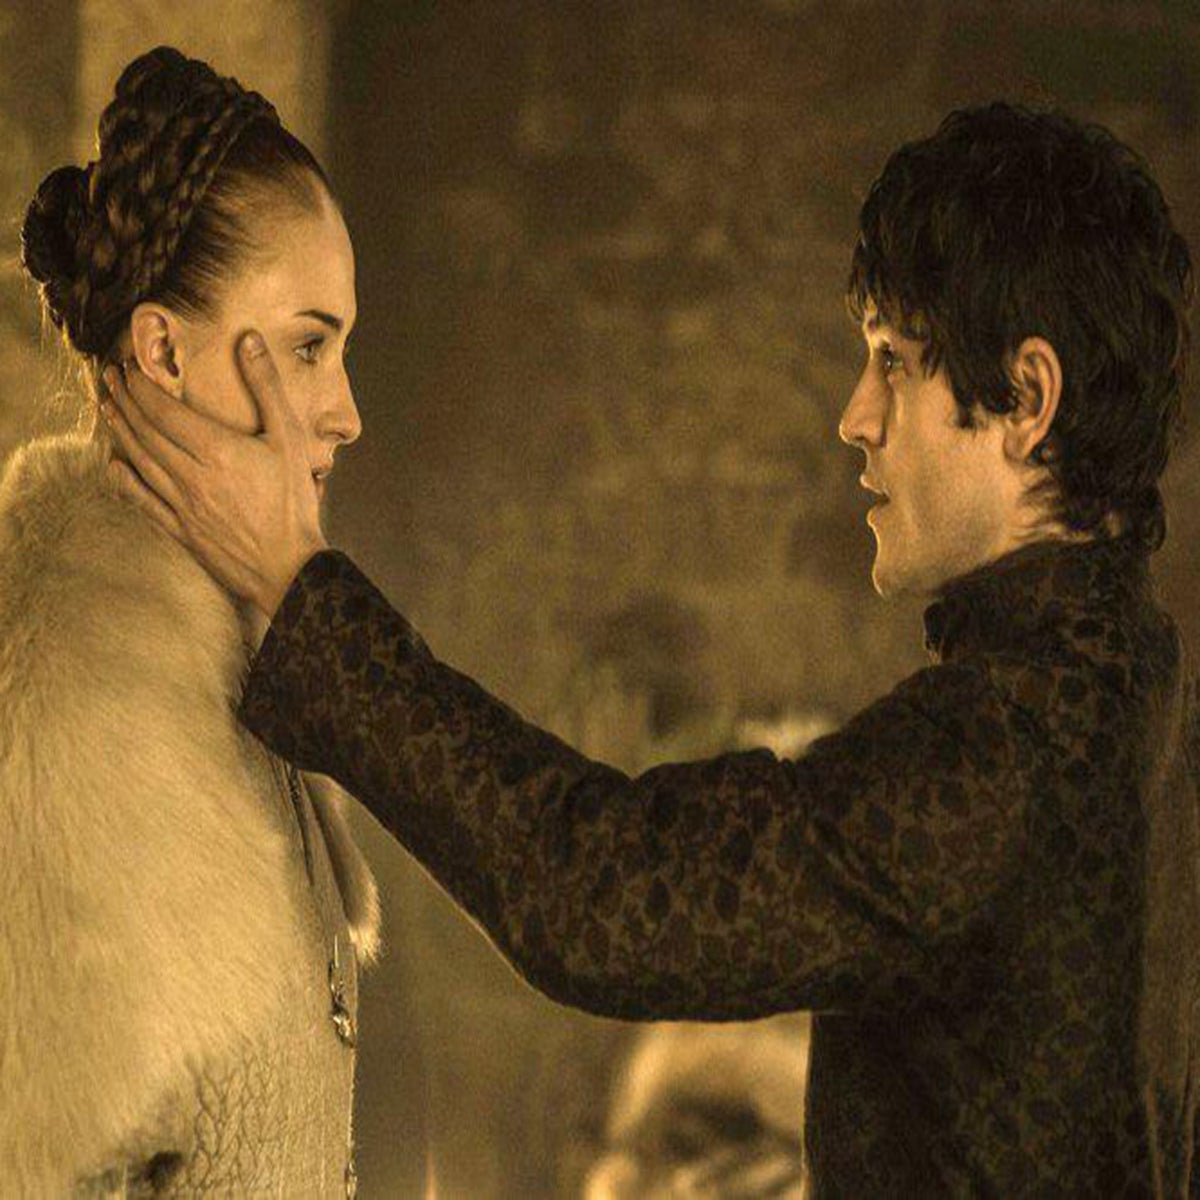 Ramsay Xxx - Game of Thrones season 5 episode 6: Fans outraged by Sansa Stark rape scene  as Sophie Turner reveals she 'secretly loved it' | The Independent | The  Independent